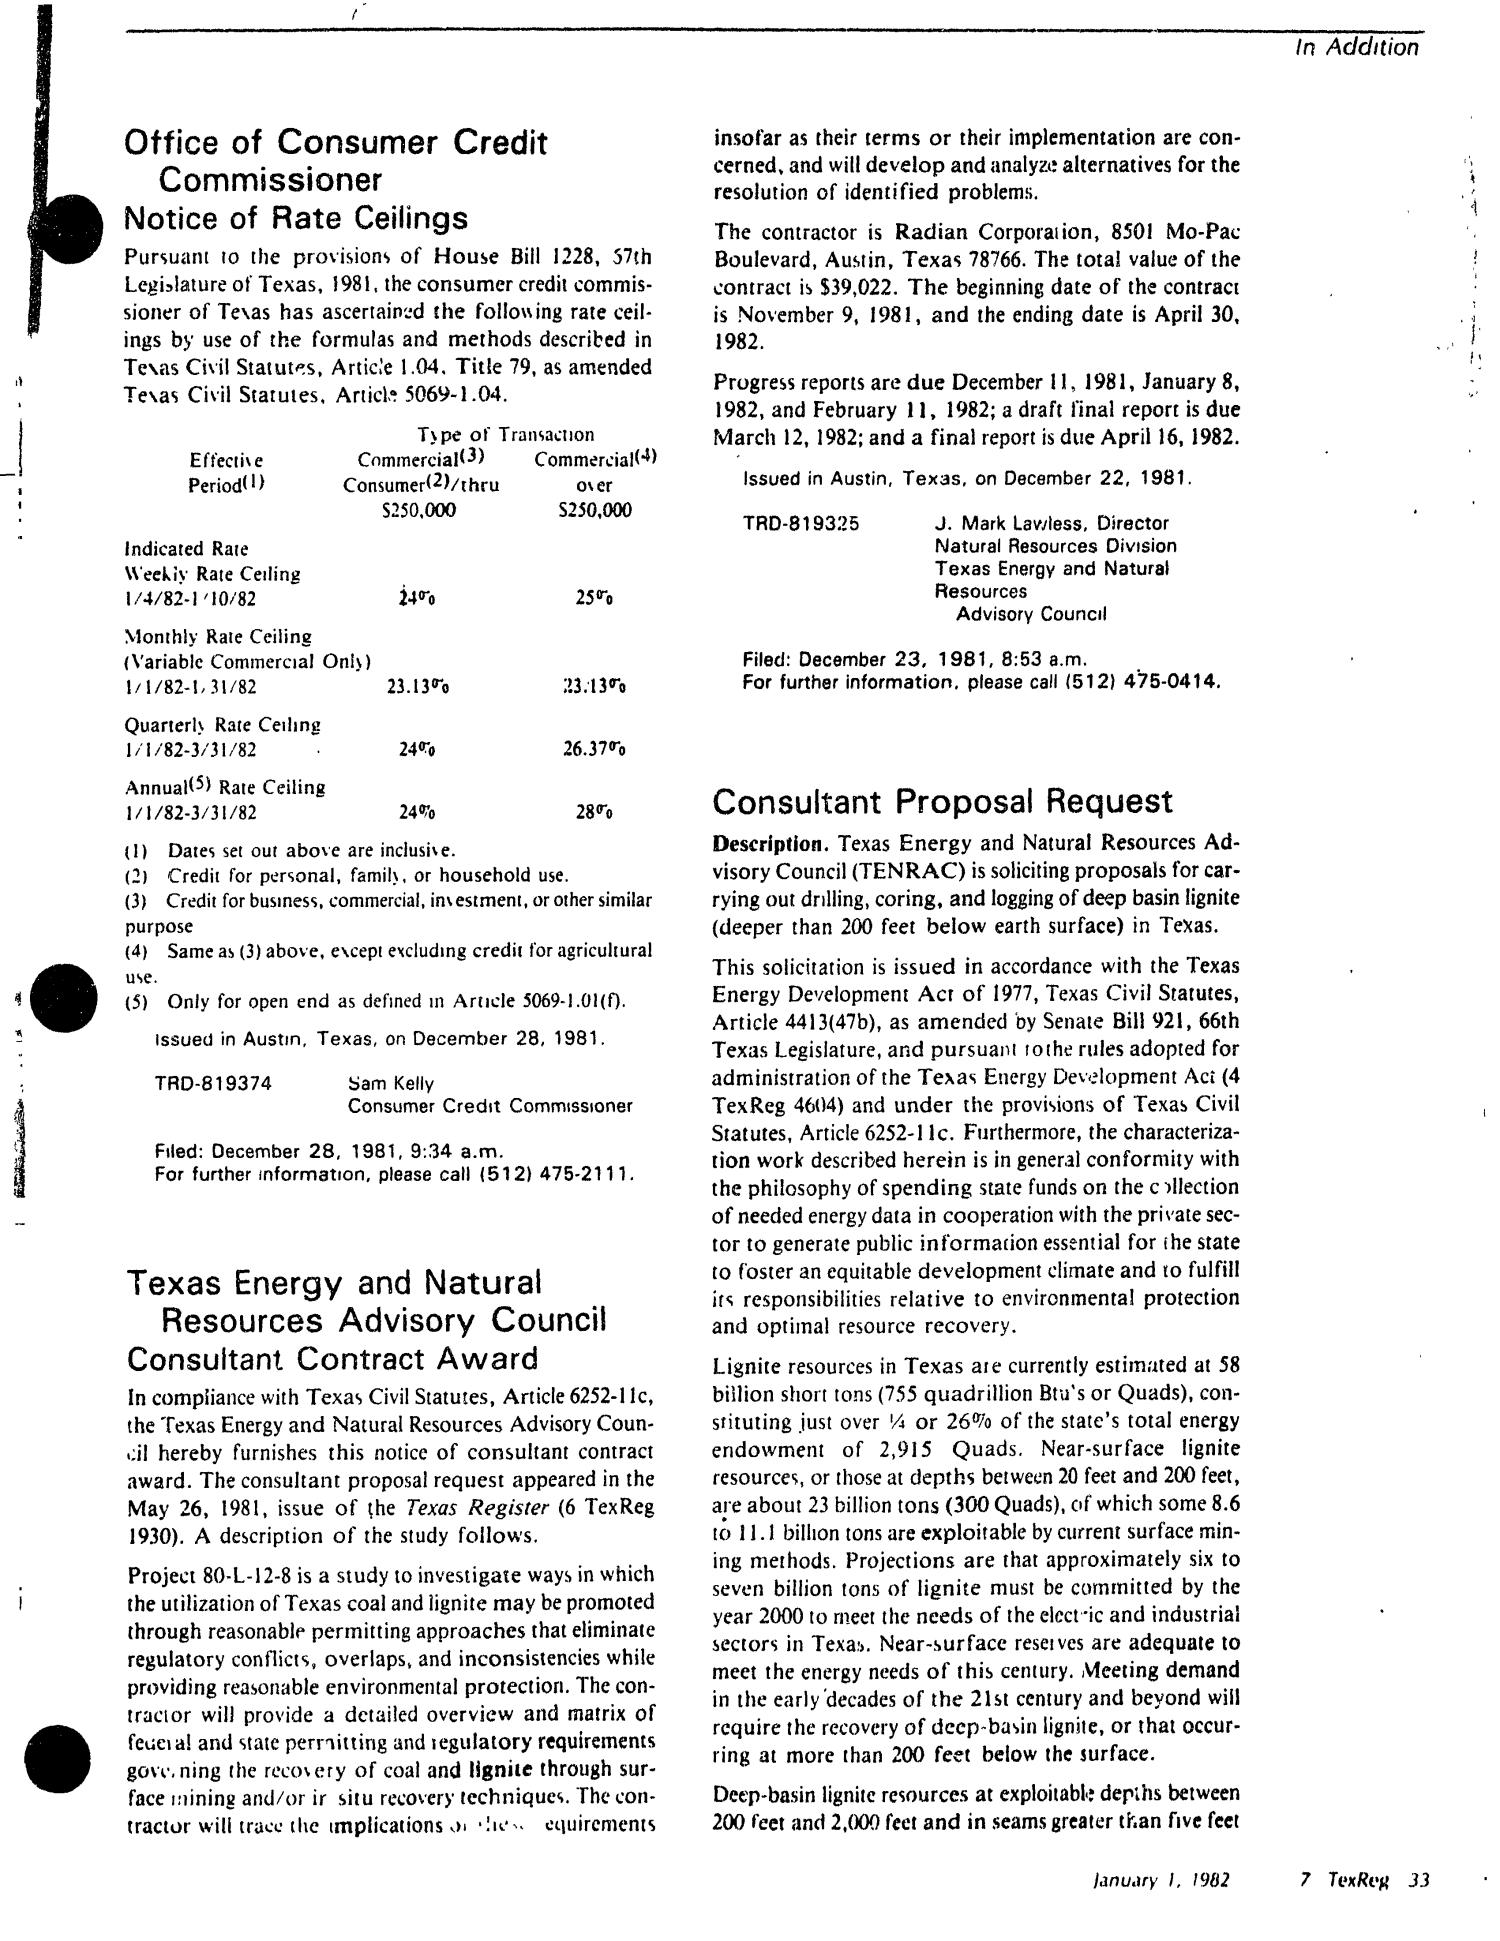 Texas Register, Volume 7, Number 1, Pages 1-38, January 1, 1982
                                                
                                                    33
                                                